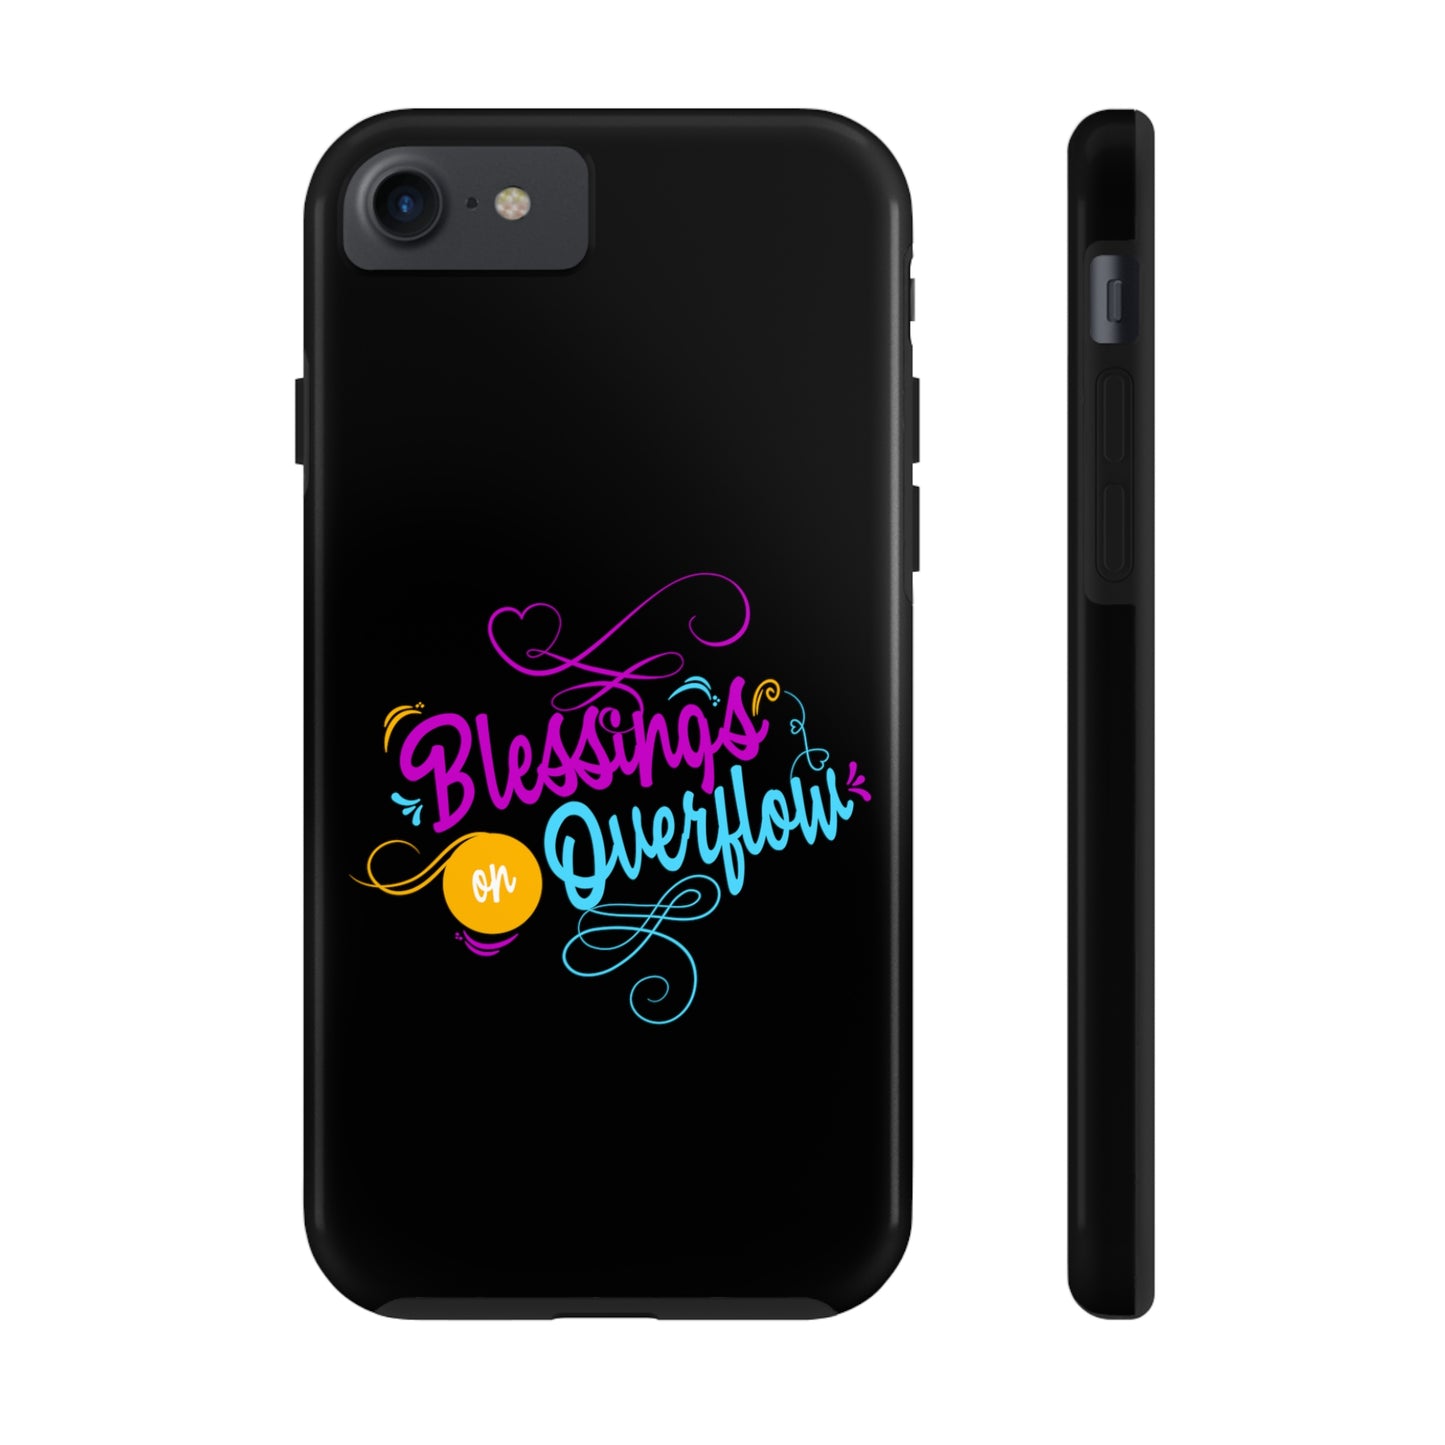 Blessings On Overflow Tough Phone Cases, Case-Mate